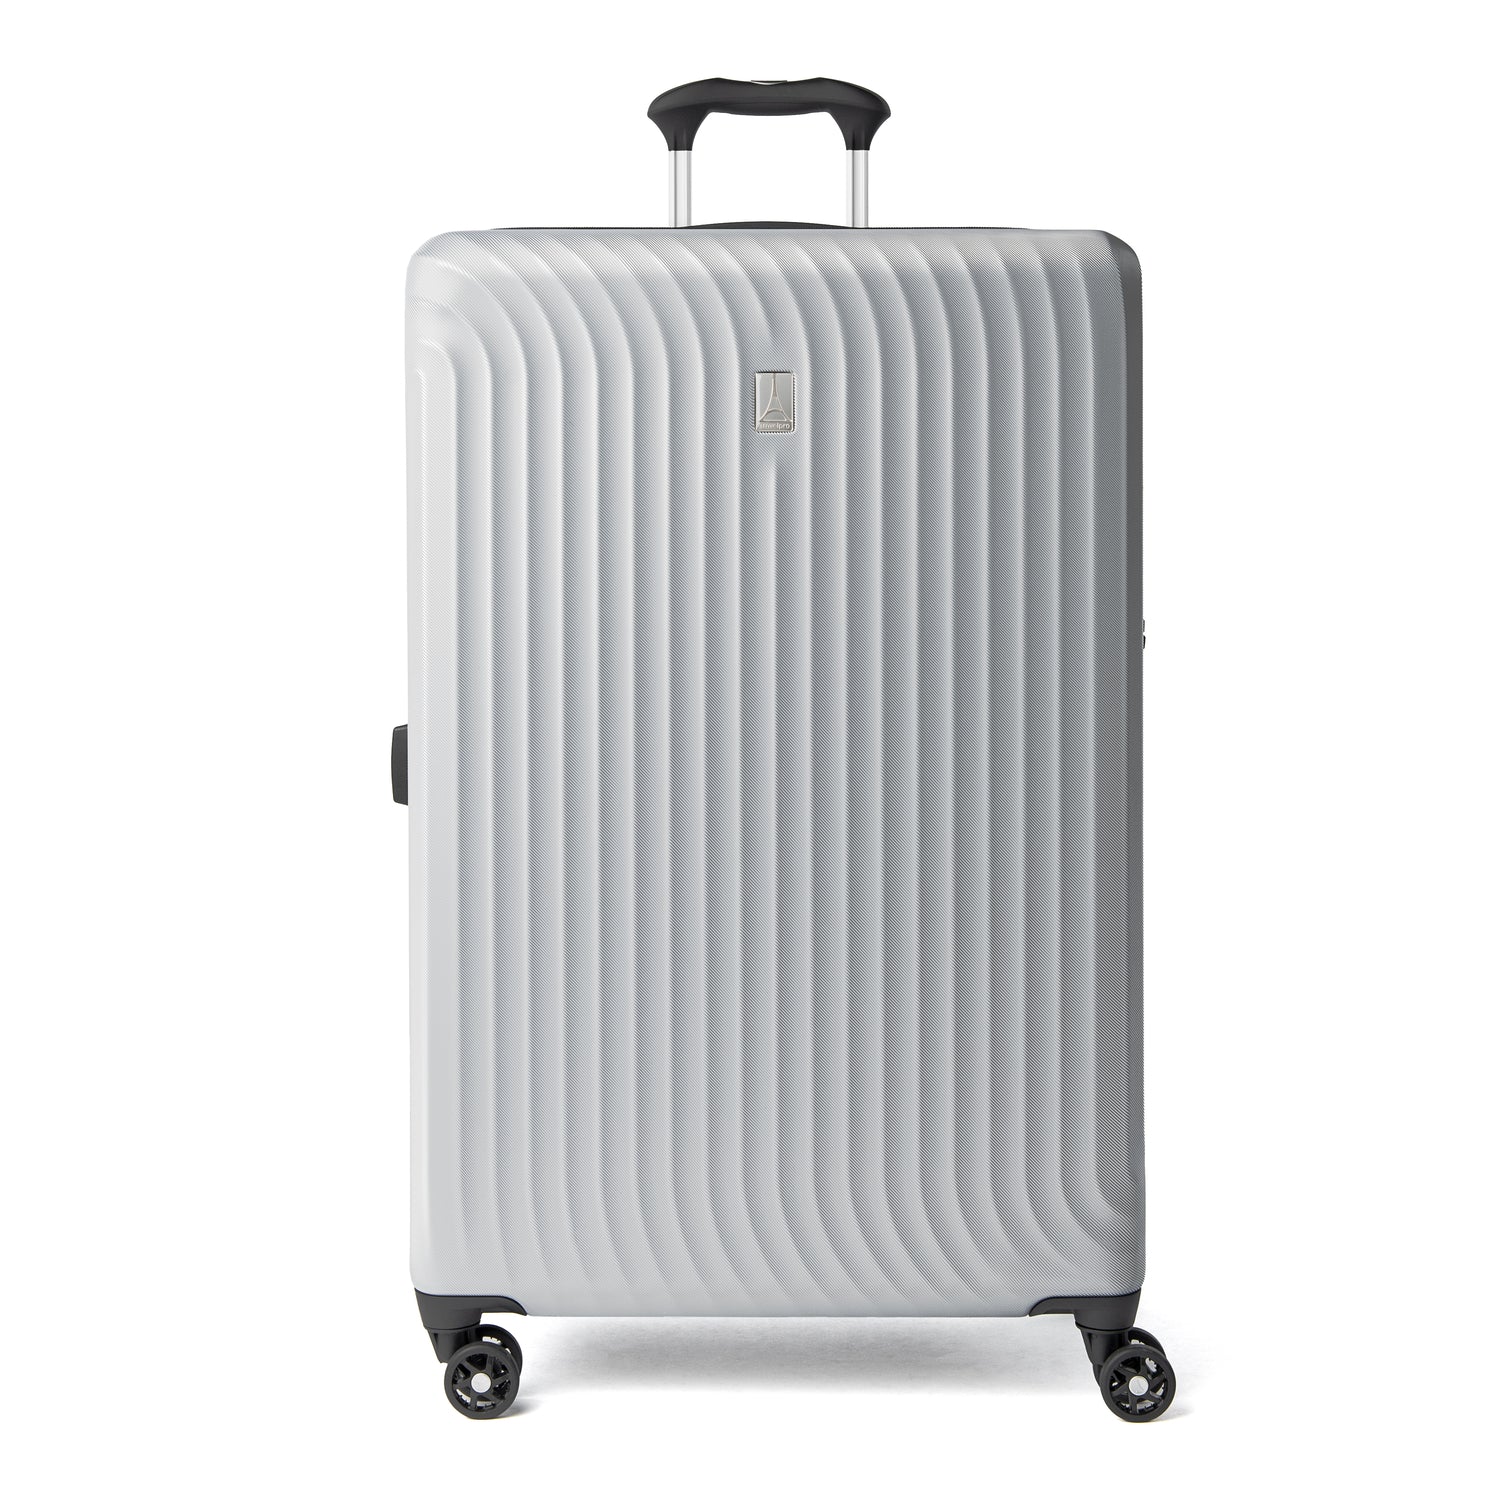 Travelpro Maxlite Air Large Check-in Expandable Hardside Spinner Luggage - Metallic Silver